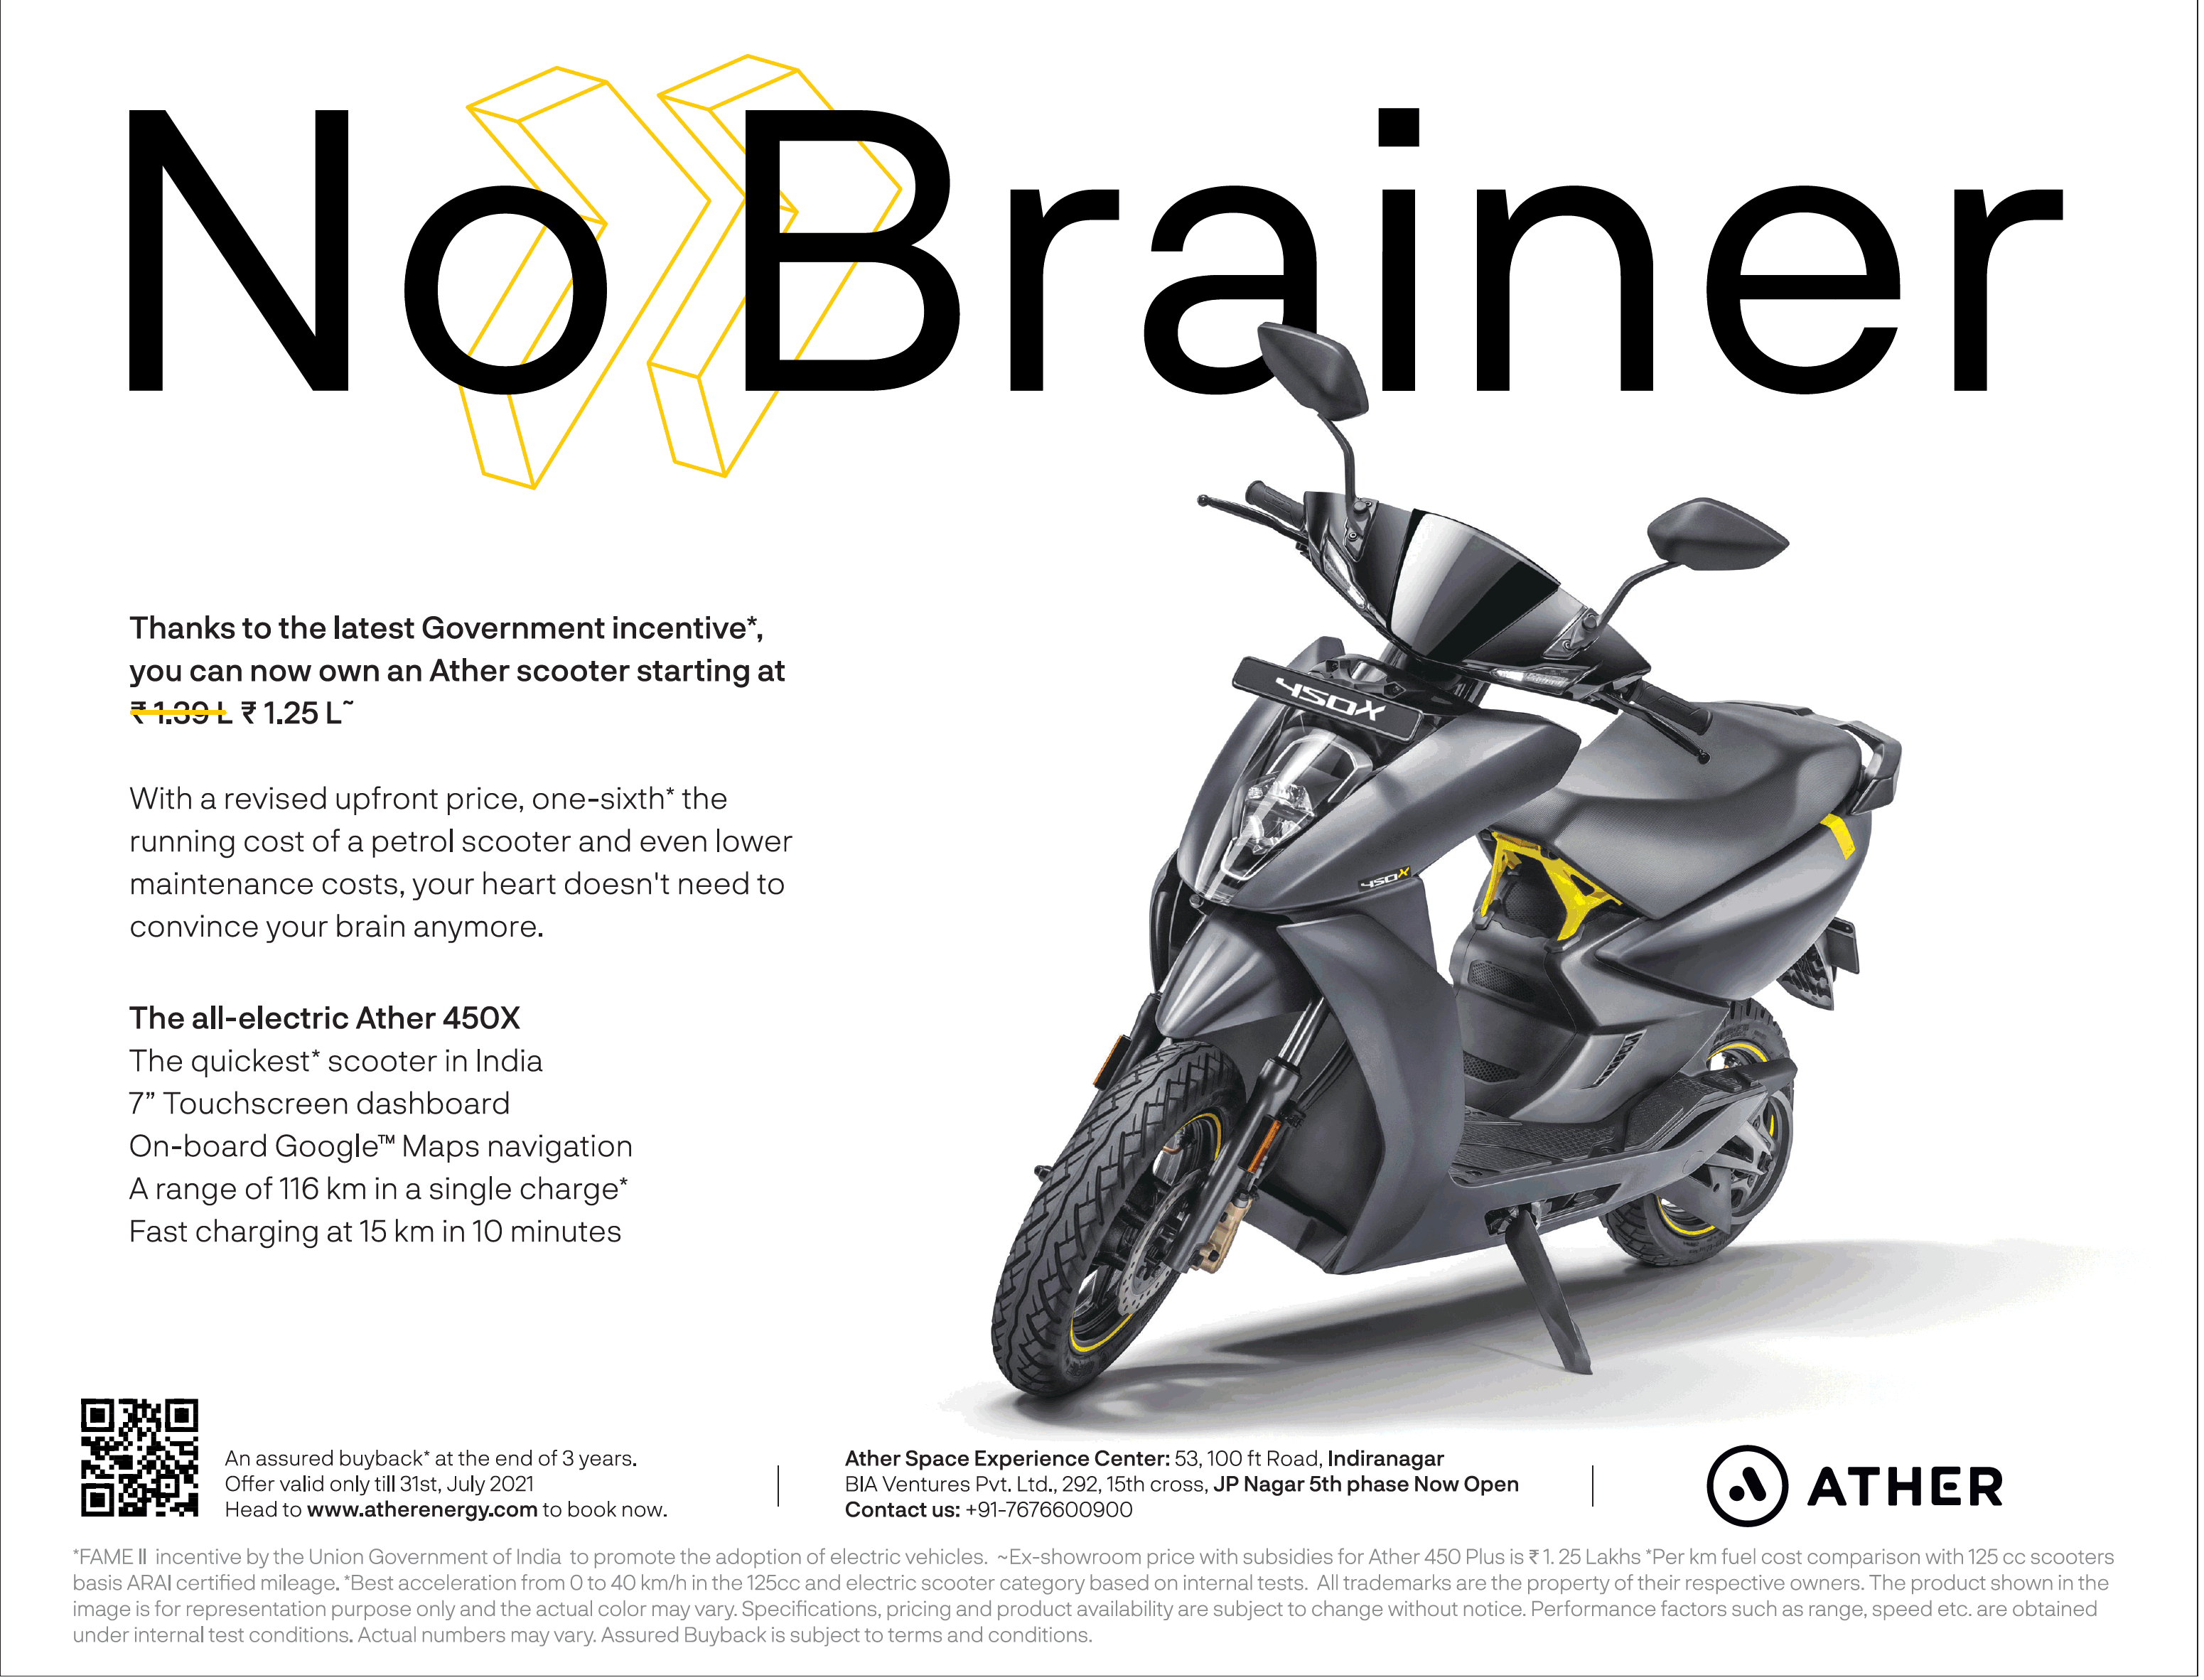 ather-scooter-starting-at-rs-1-25-lakh-no-brainer-ad-toi-bangalore-11-7-2021